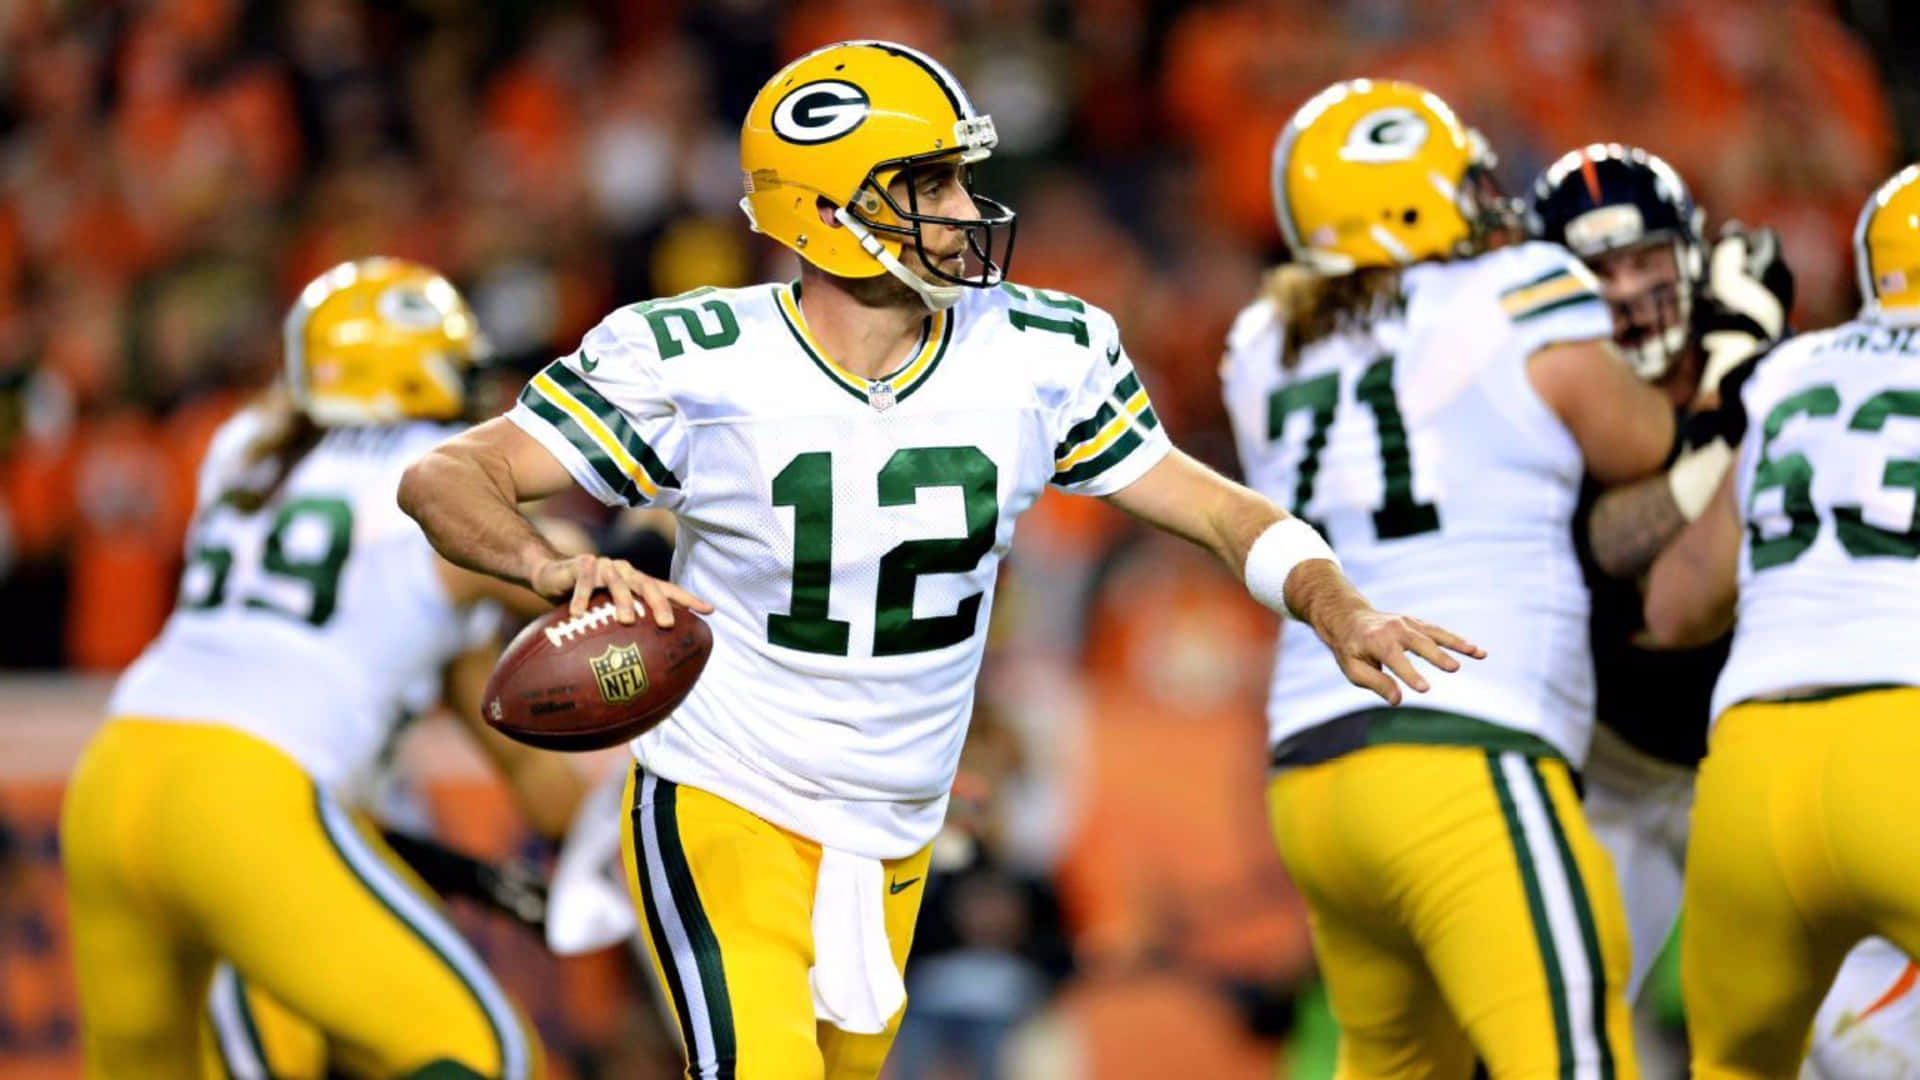 Aaron Rodgers confidently calls the next play.